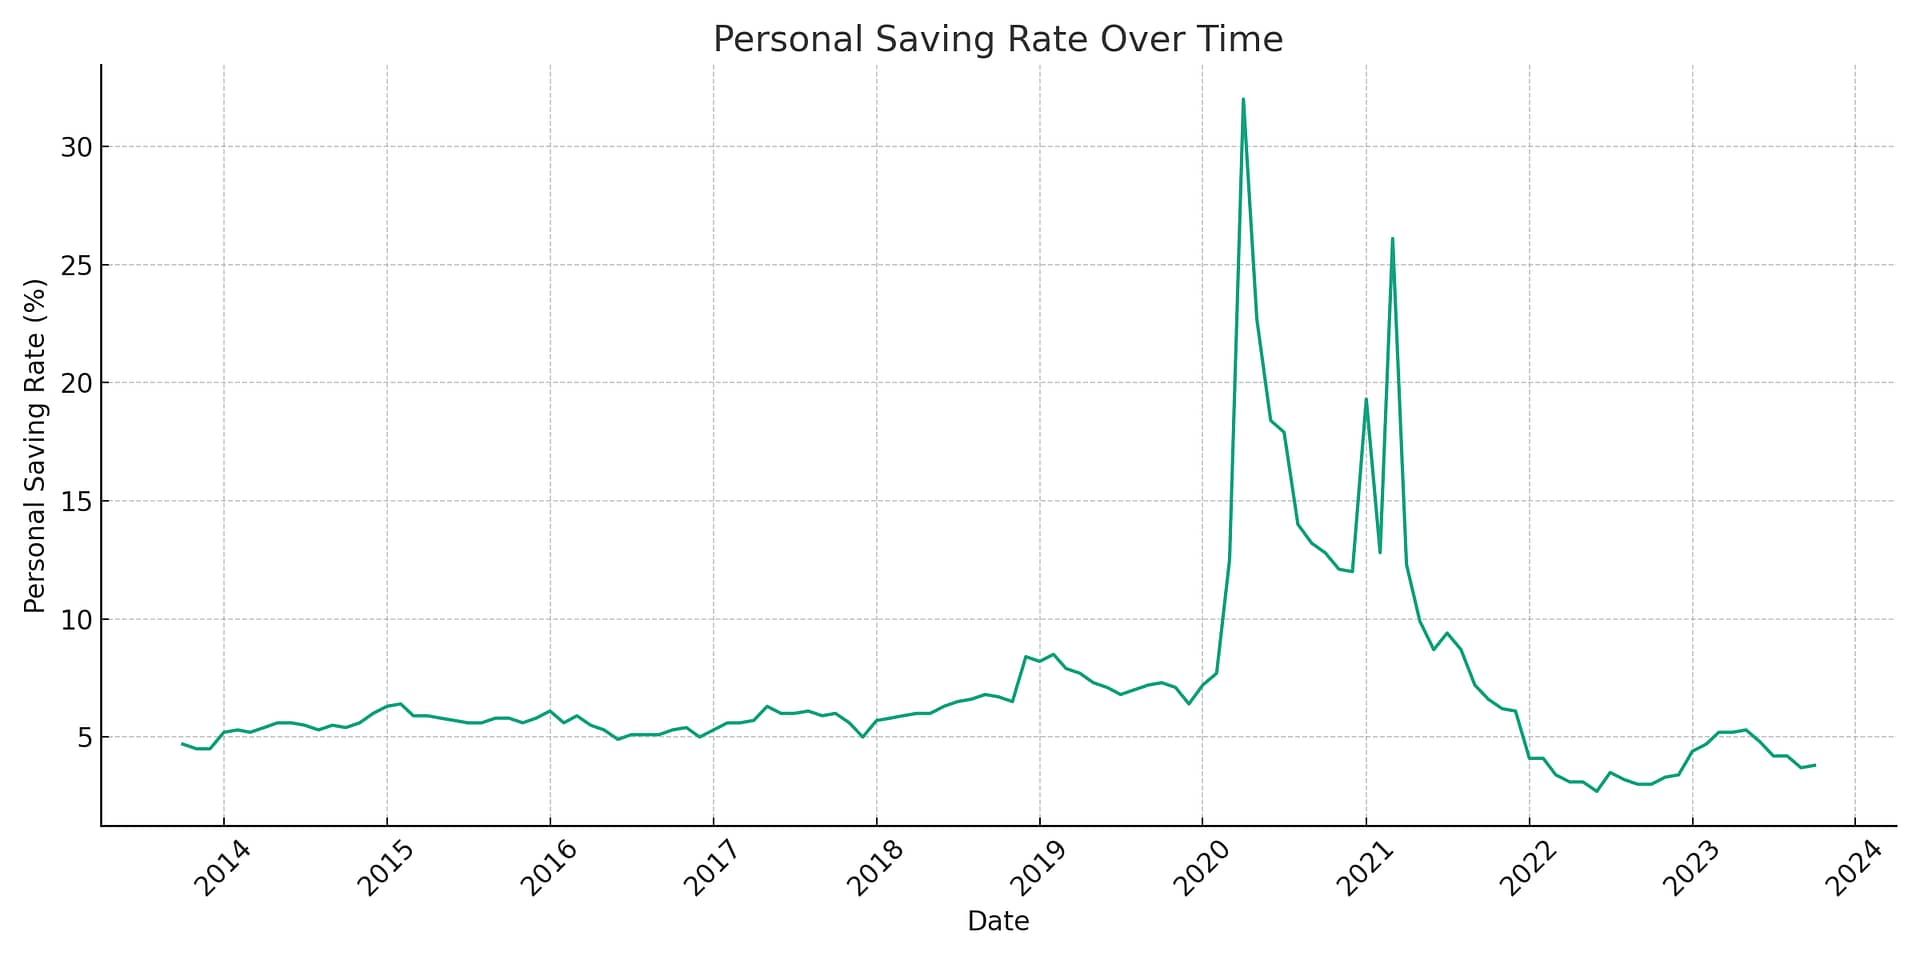 Personal Saving Rate Over Time